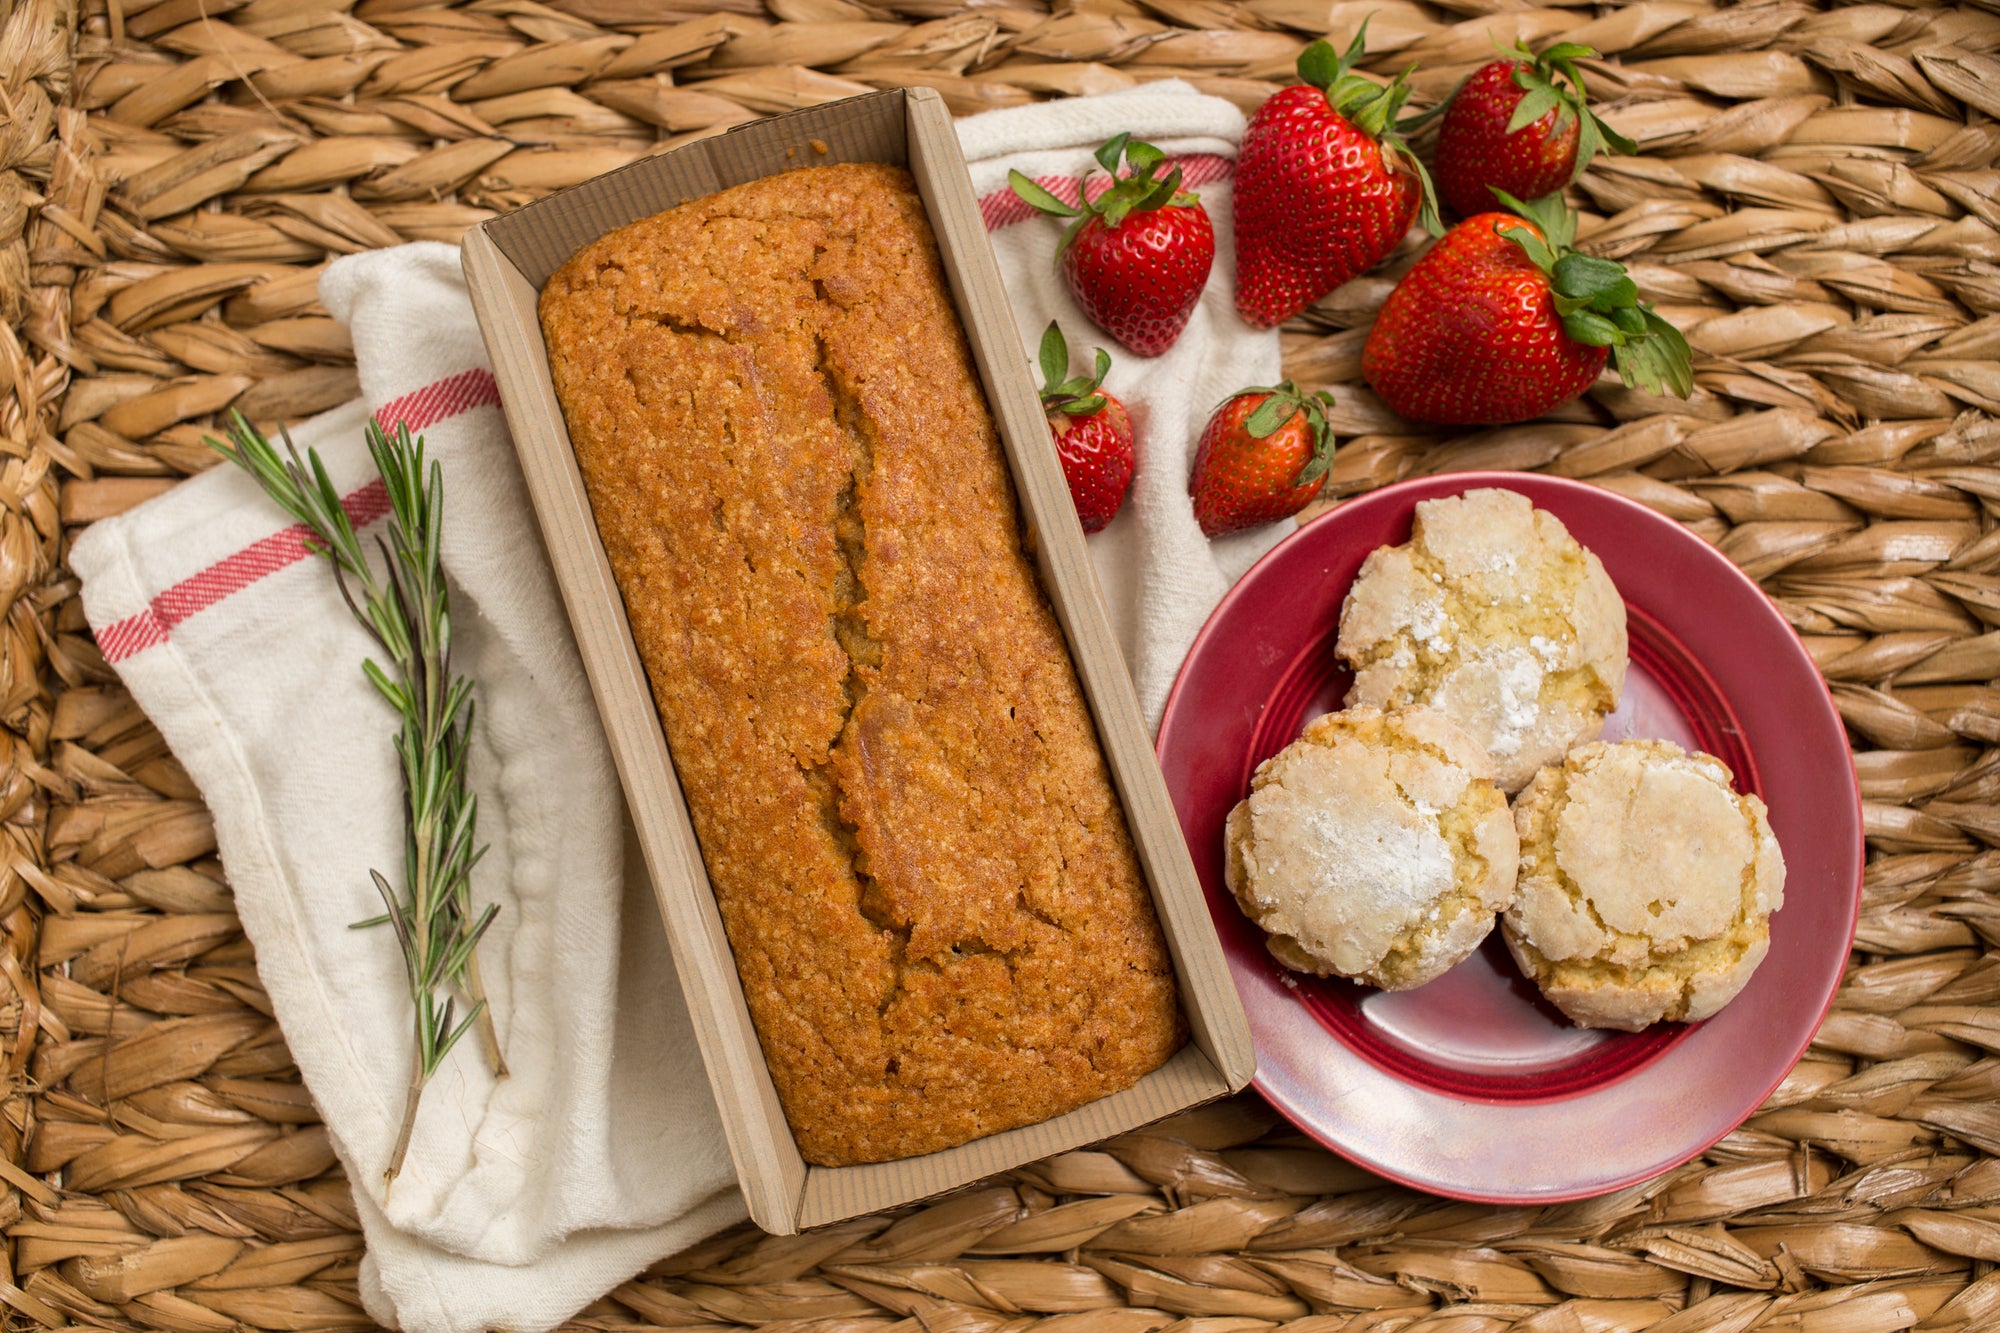 Cardamom Coconut cookies on a red plate, spiced sweet potato cake, and strawberries